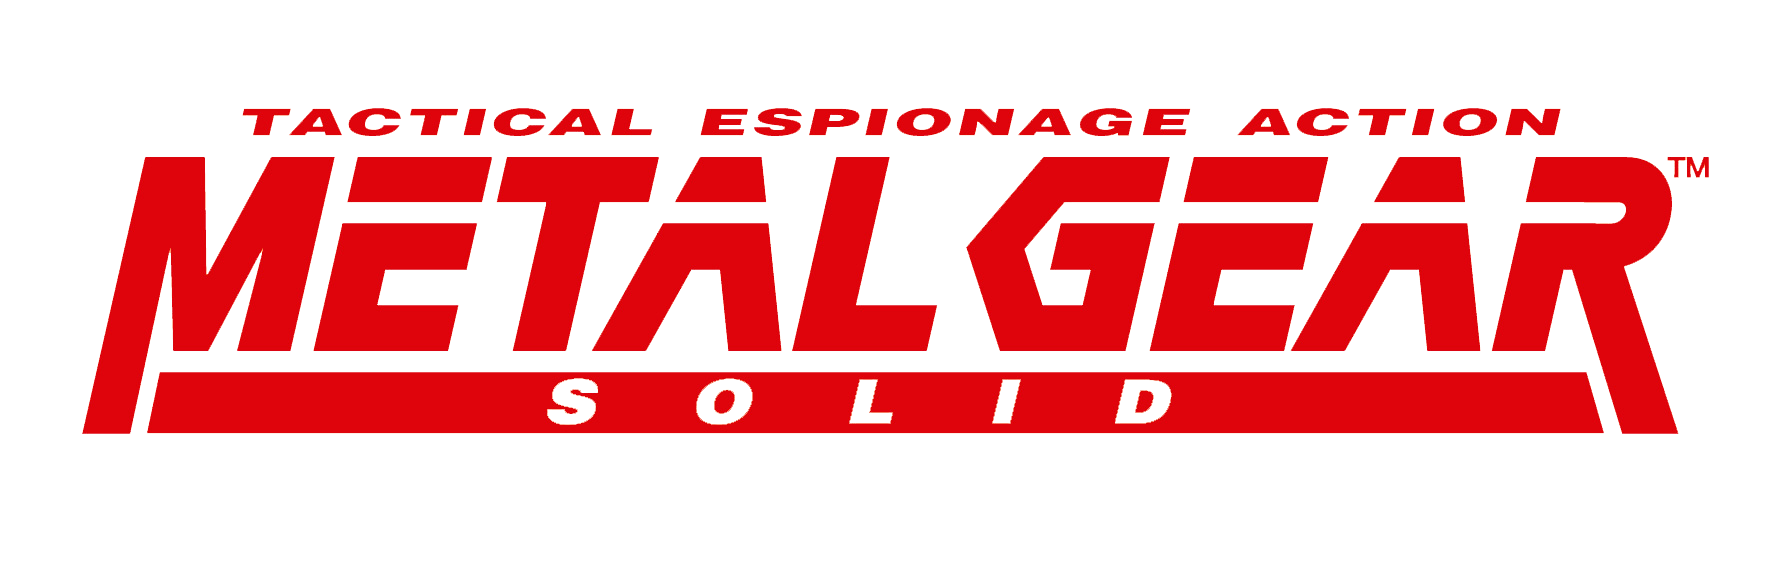 The logo of Metal Gear Solid